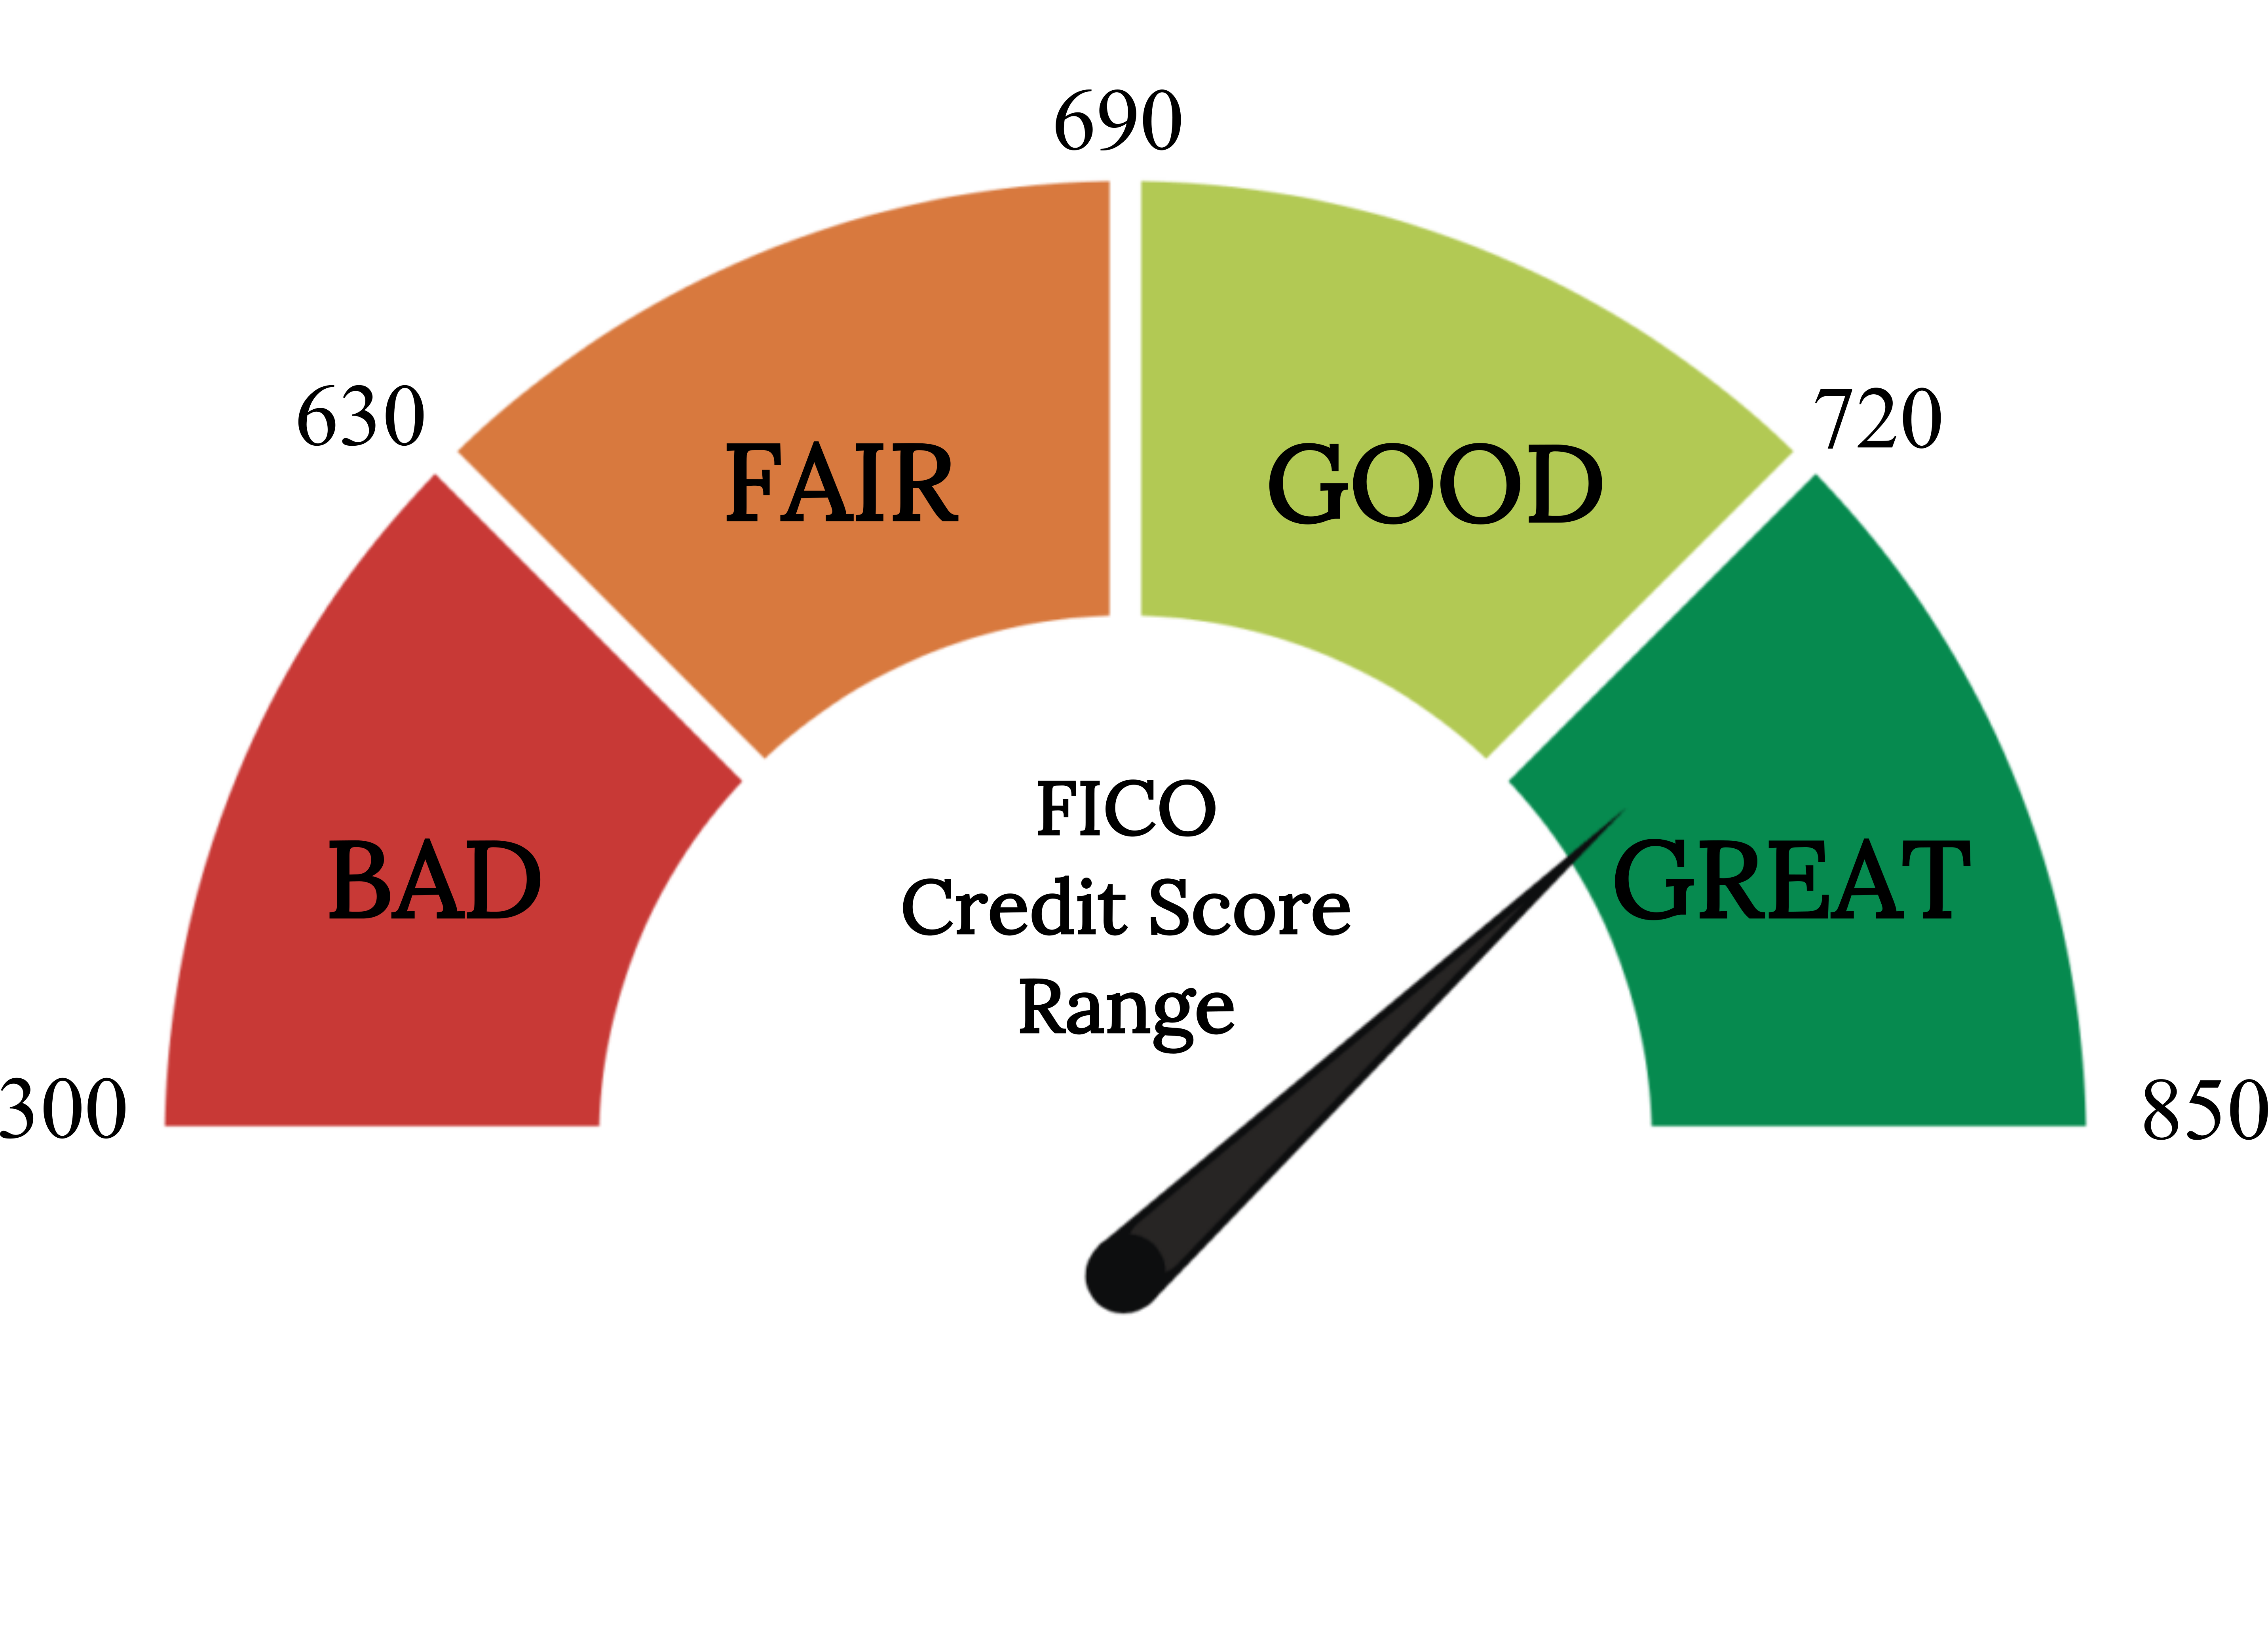 A graphic of the range of credit scores, laid out as a half circle with different colors representing different segment ranges of scores. From left to right the segments are: Range 300 to 630 is colored red and labeled “Bad.” Range 630 to 690 is colored orange and labeled “Fair.” Range 690 to 720 is colored yellow and labeled “Good.” Range 720 to 850 is colored green and labeled “Great.” Underneath the half circle says “FICO Credit Score Range.”